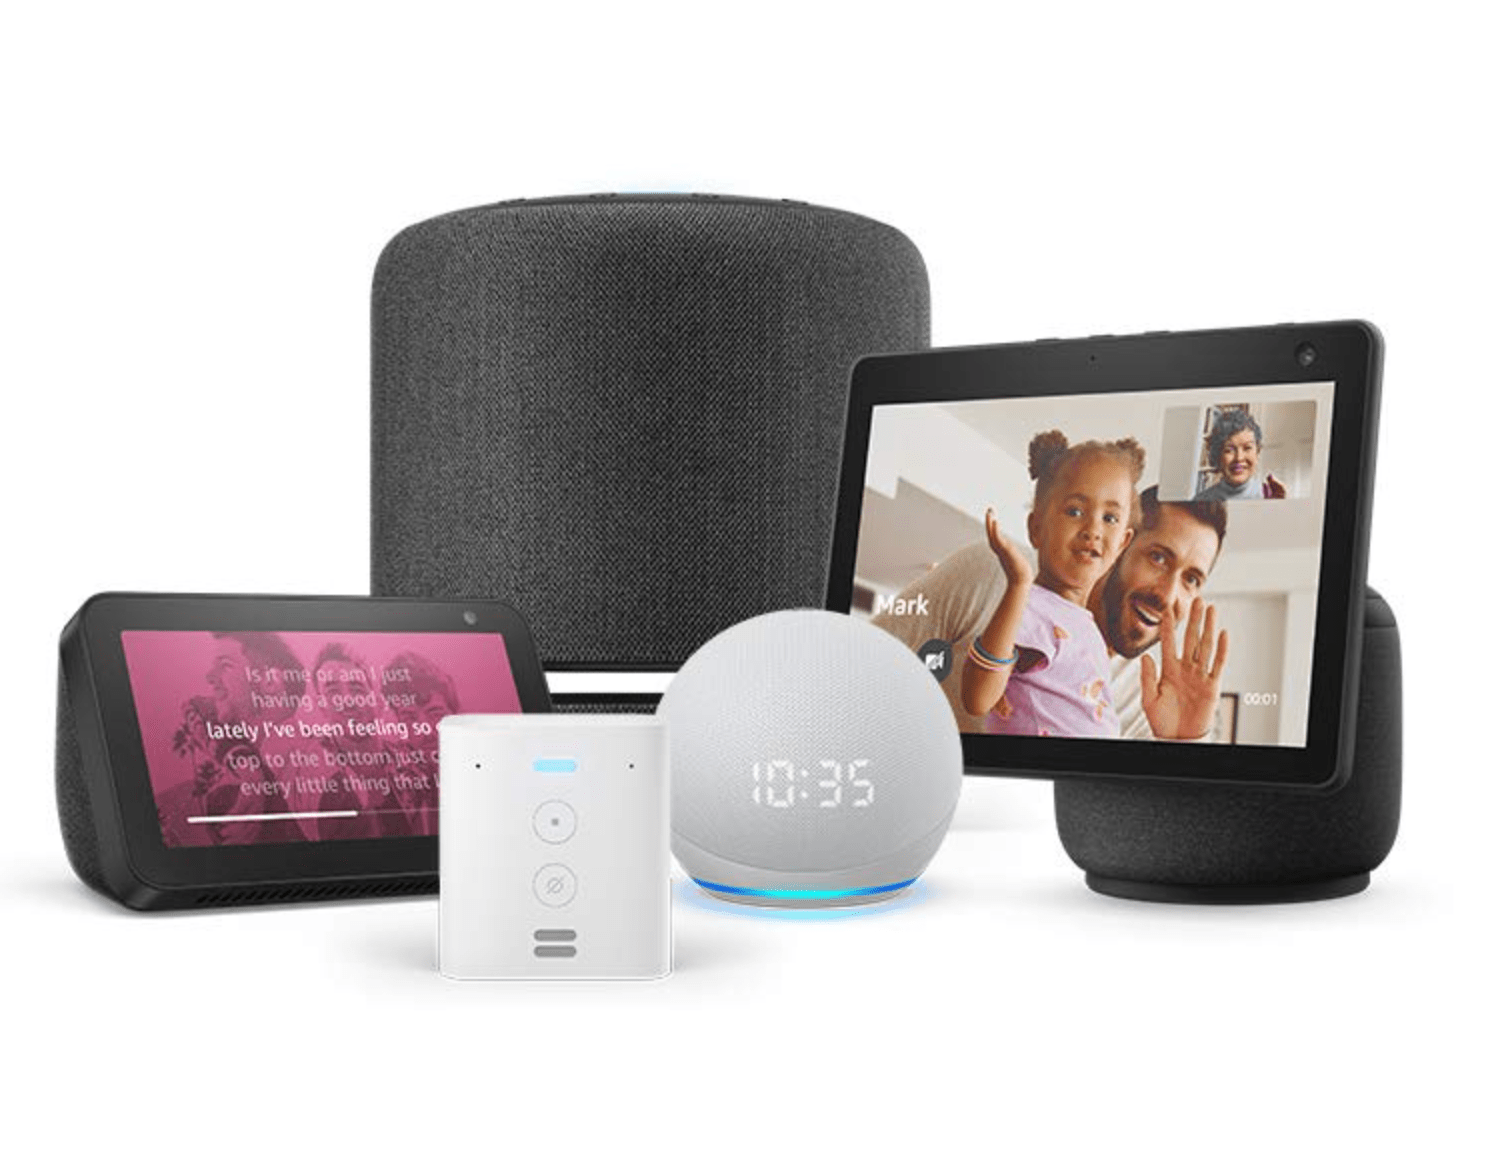 Amazon device deals: Huge savings on Echo, Fire TVs & Ring this Prime Day